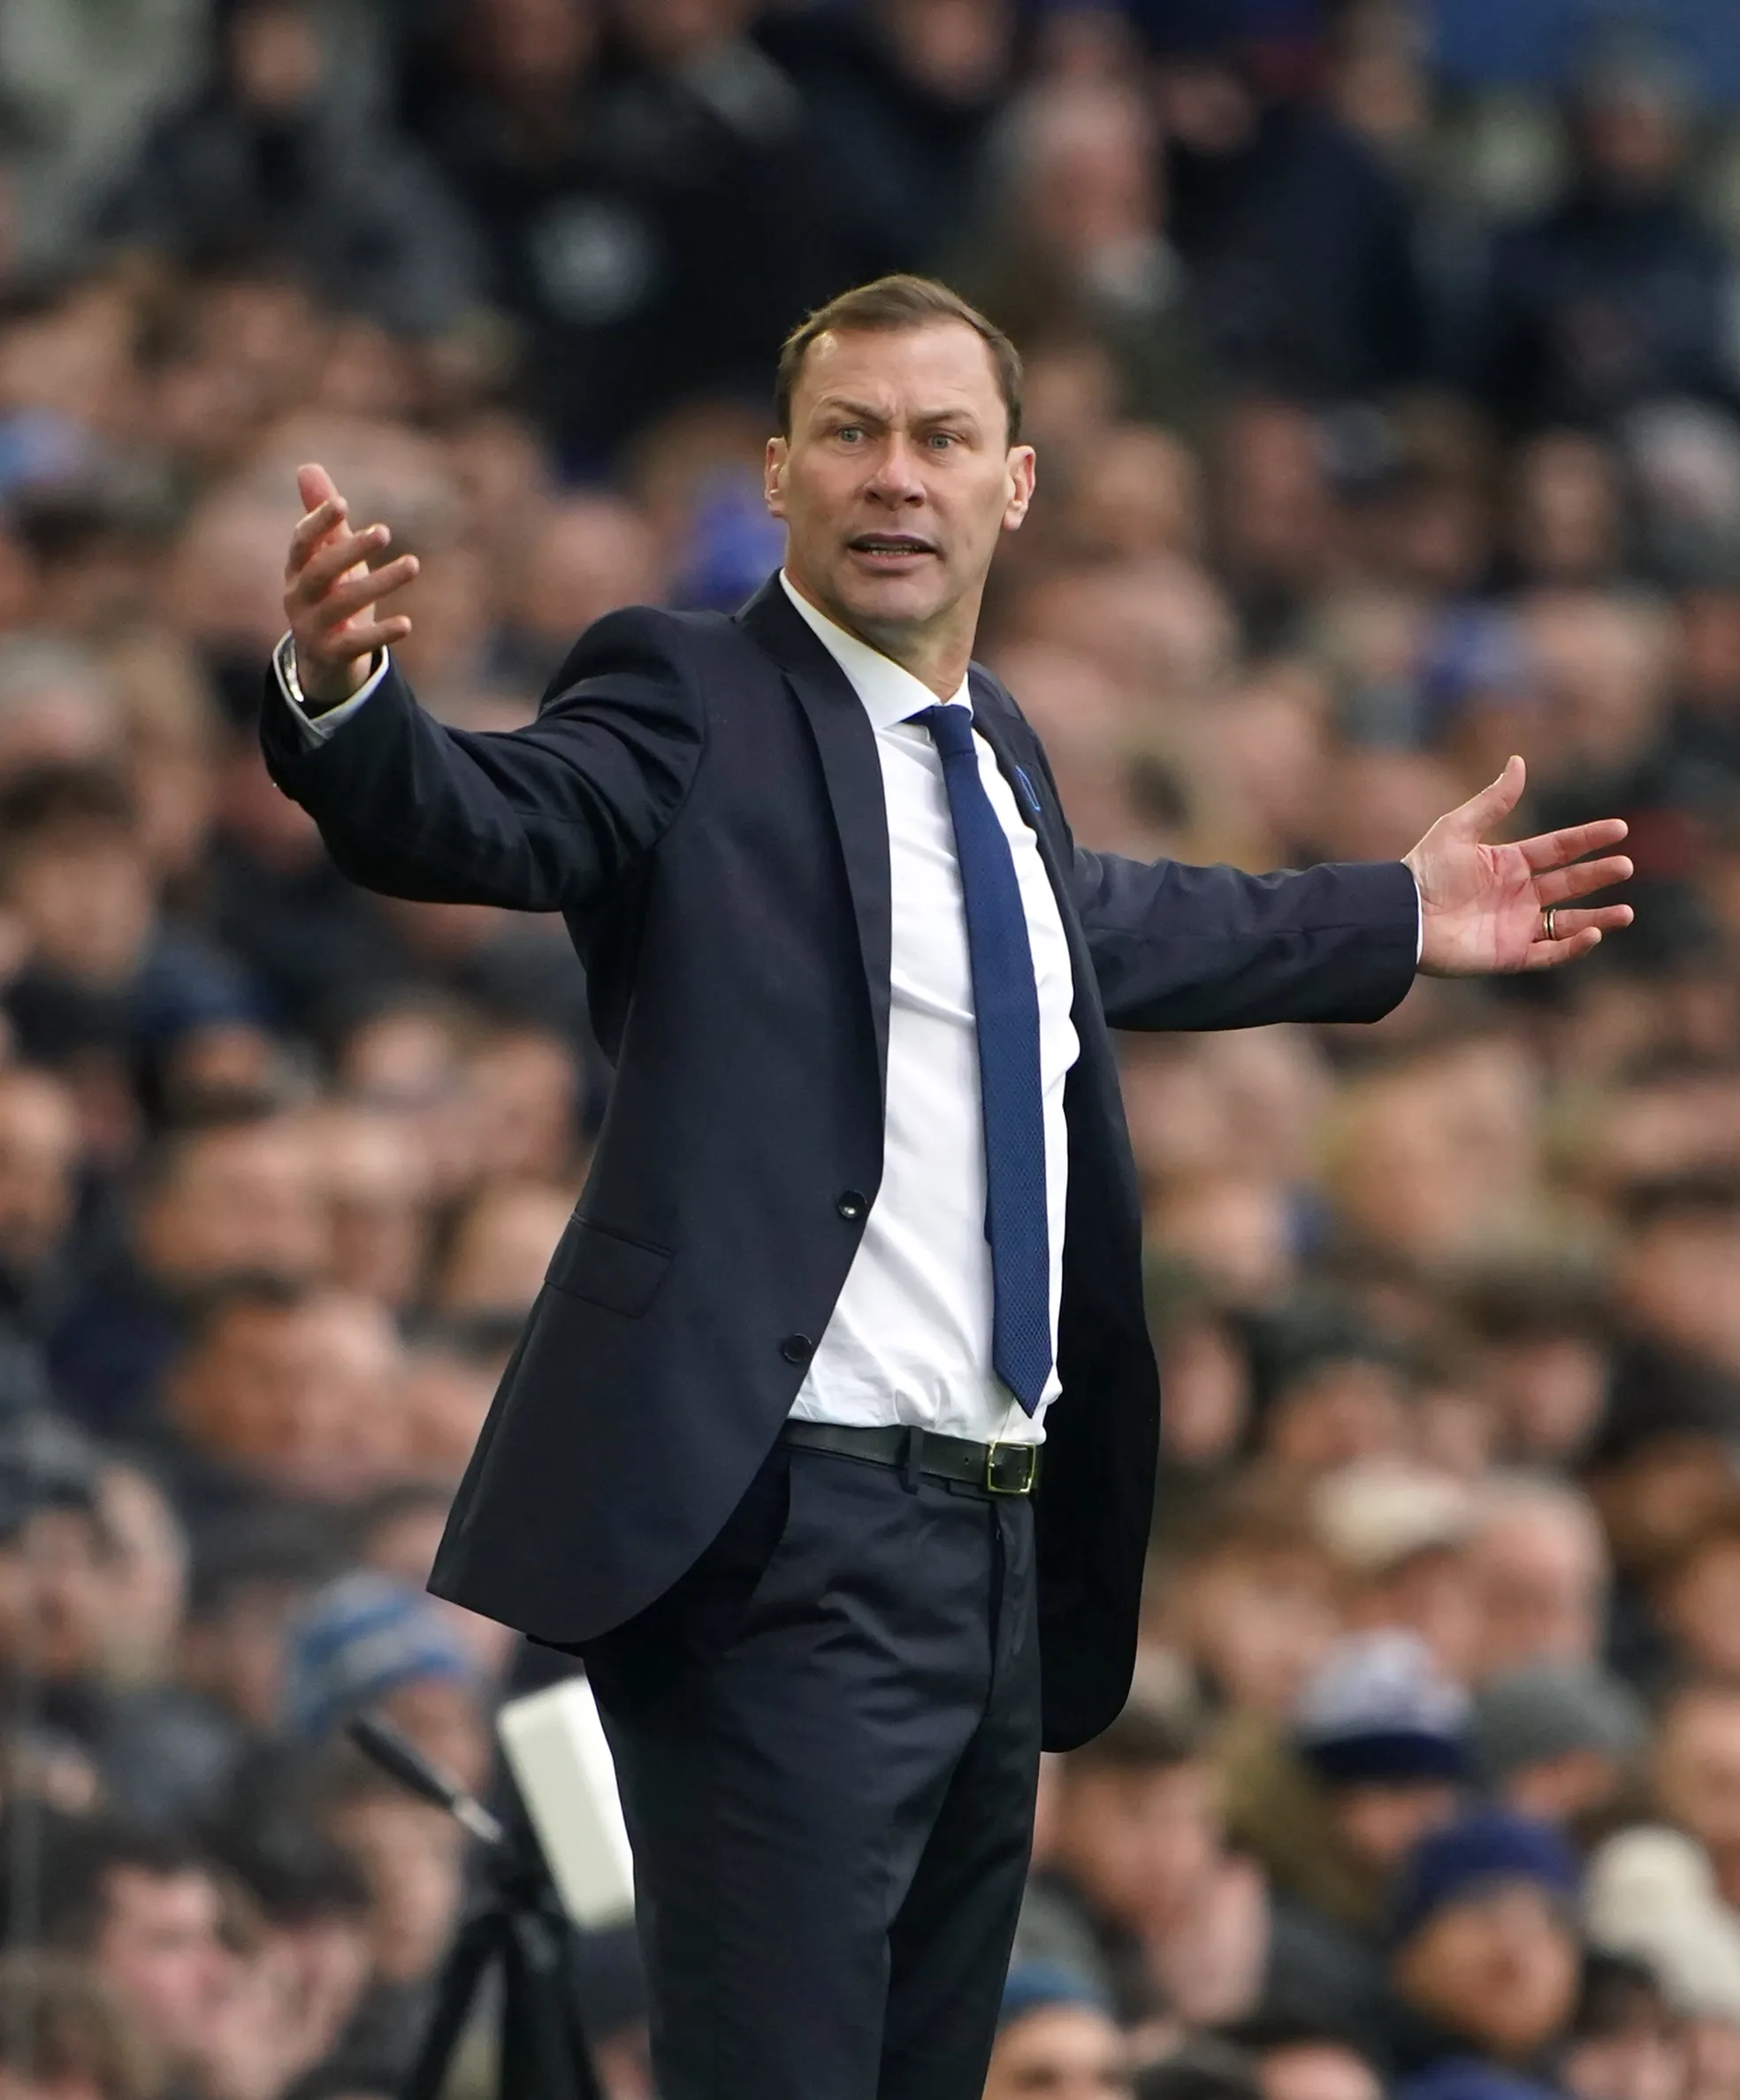 Everton have turned to former player Duncan Ferguson as caretaker manager until the end of the season